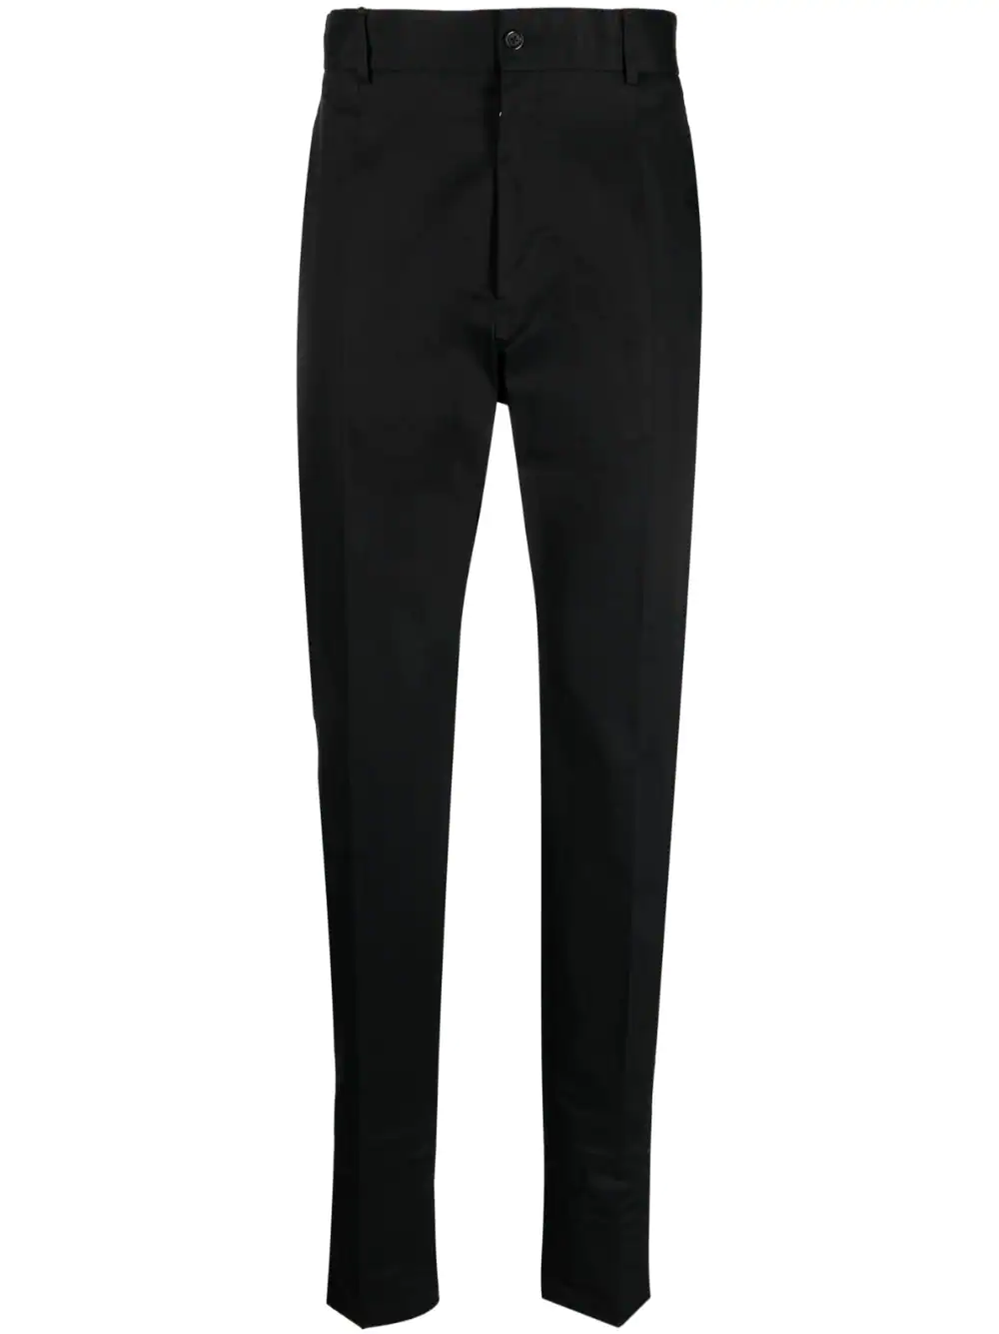 DOLCE & GABBANA HIGH-WAISTED TAILORED TROUSERS